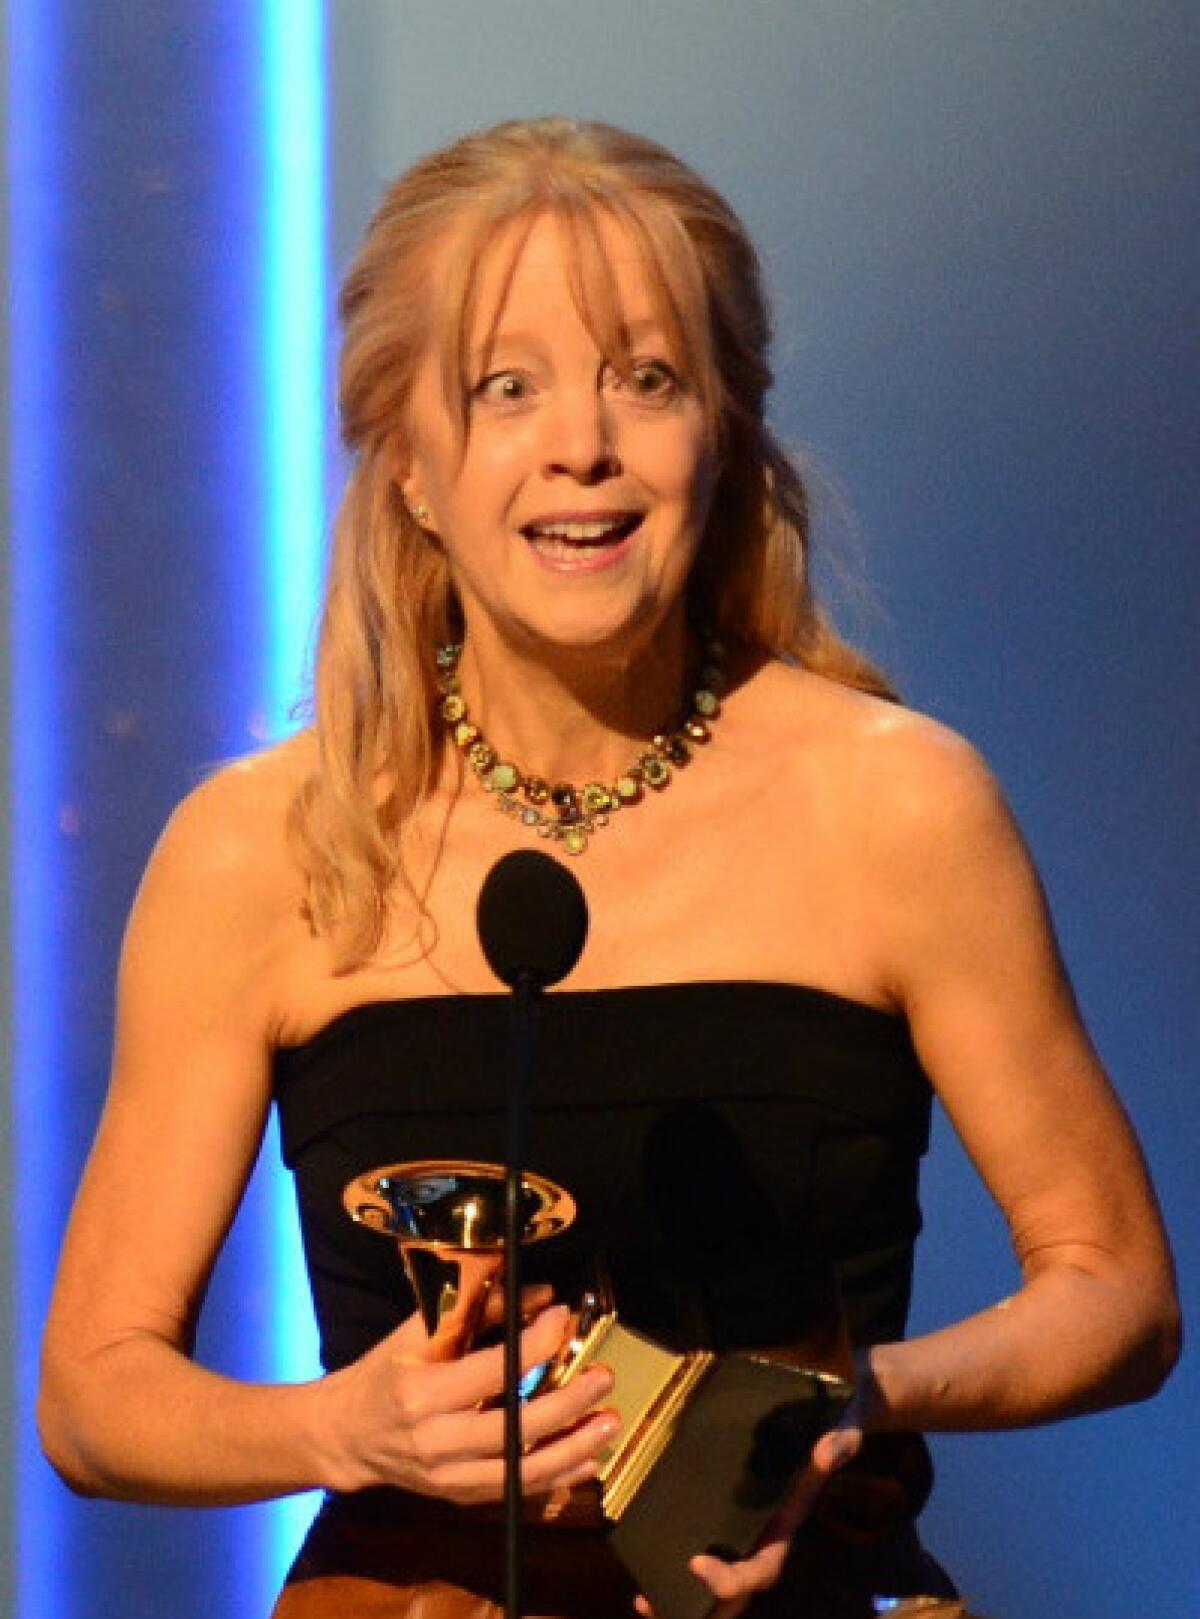 Maria Schneider accepts her Grammy Award for contemporary classical composition for "Winter Morning Walks" at the Nokia Theatre in Los Angeles.